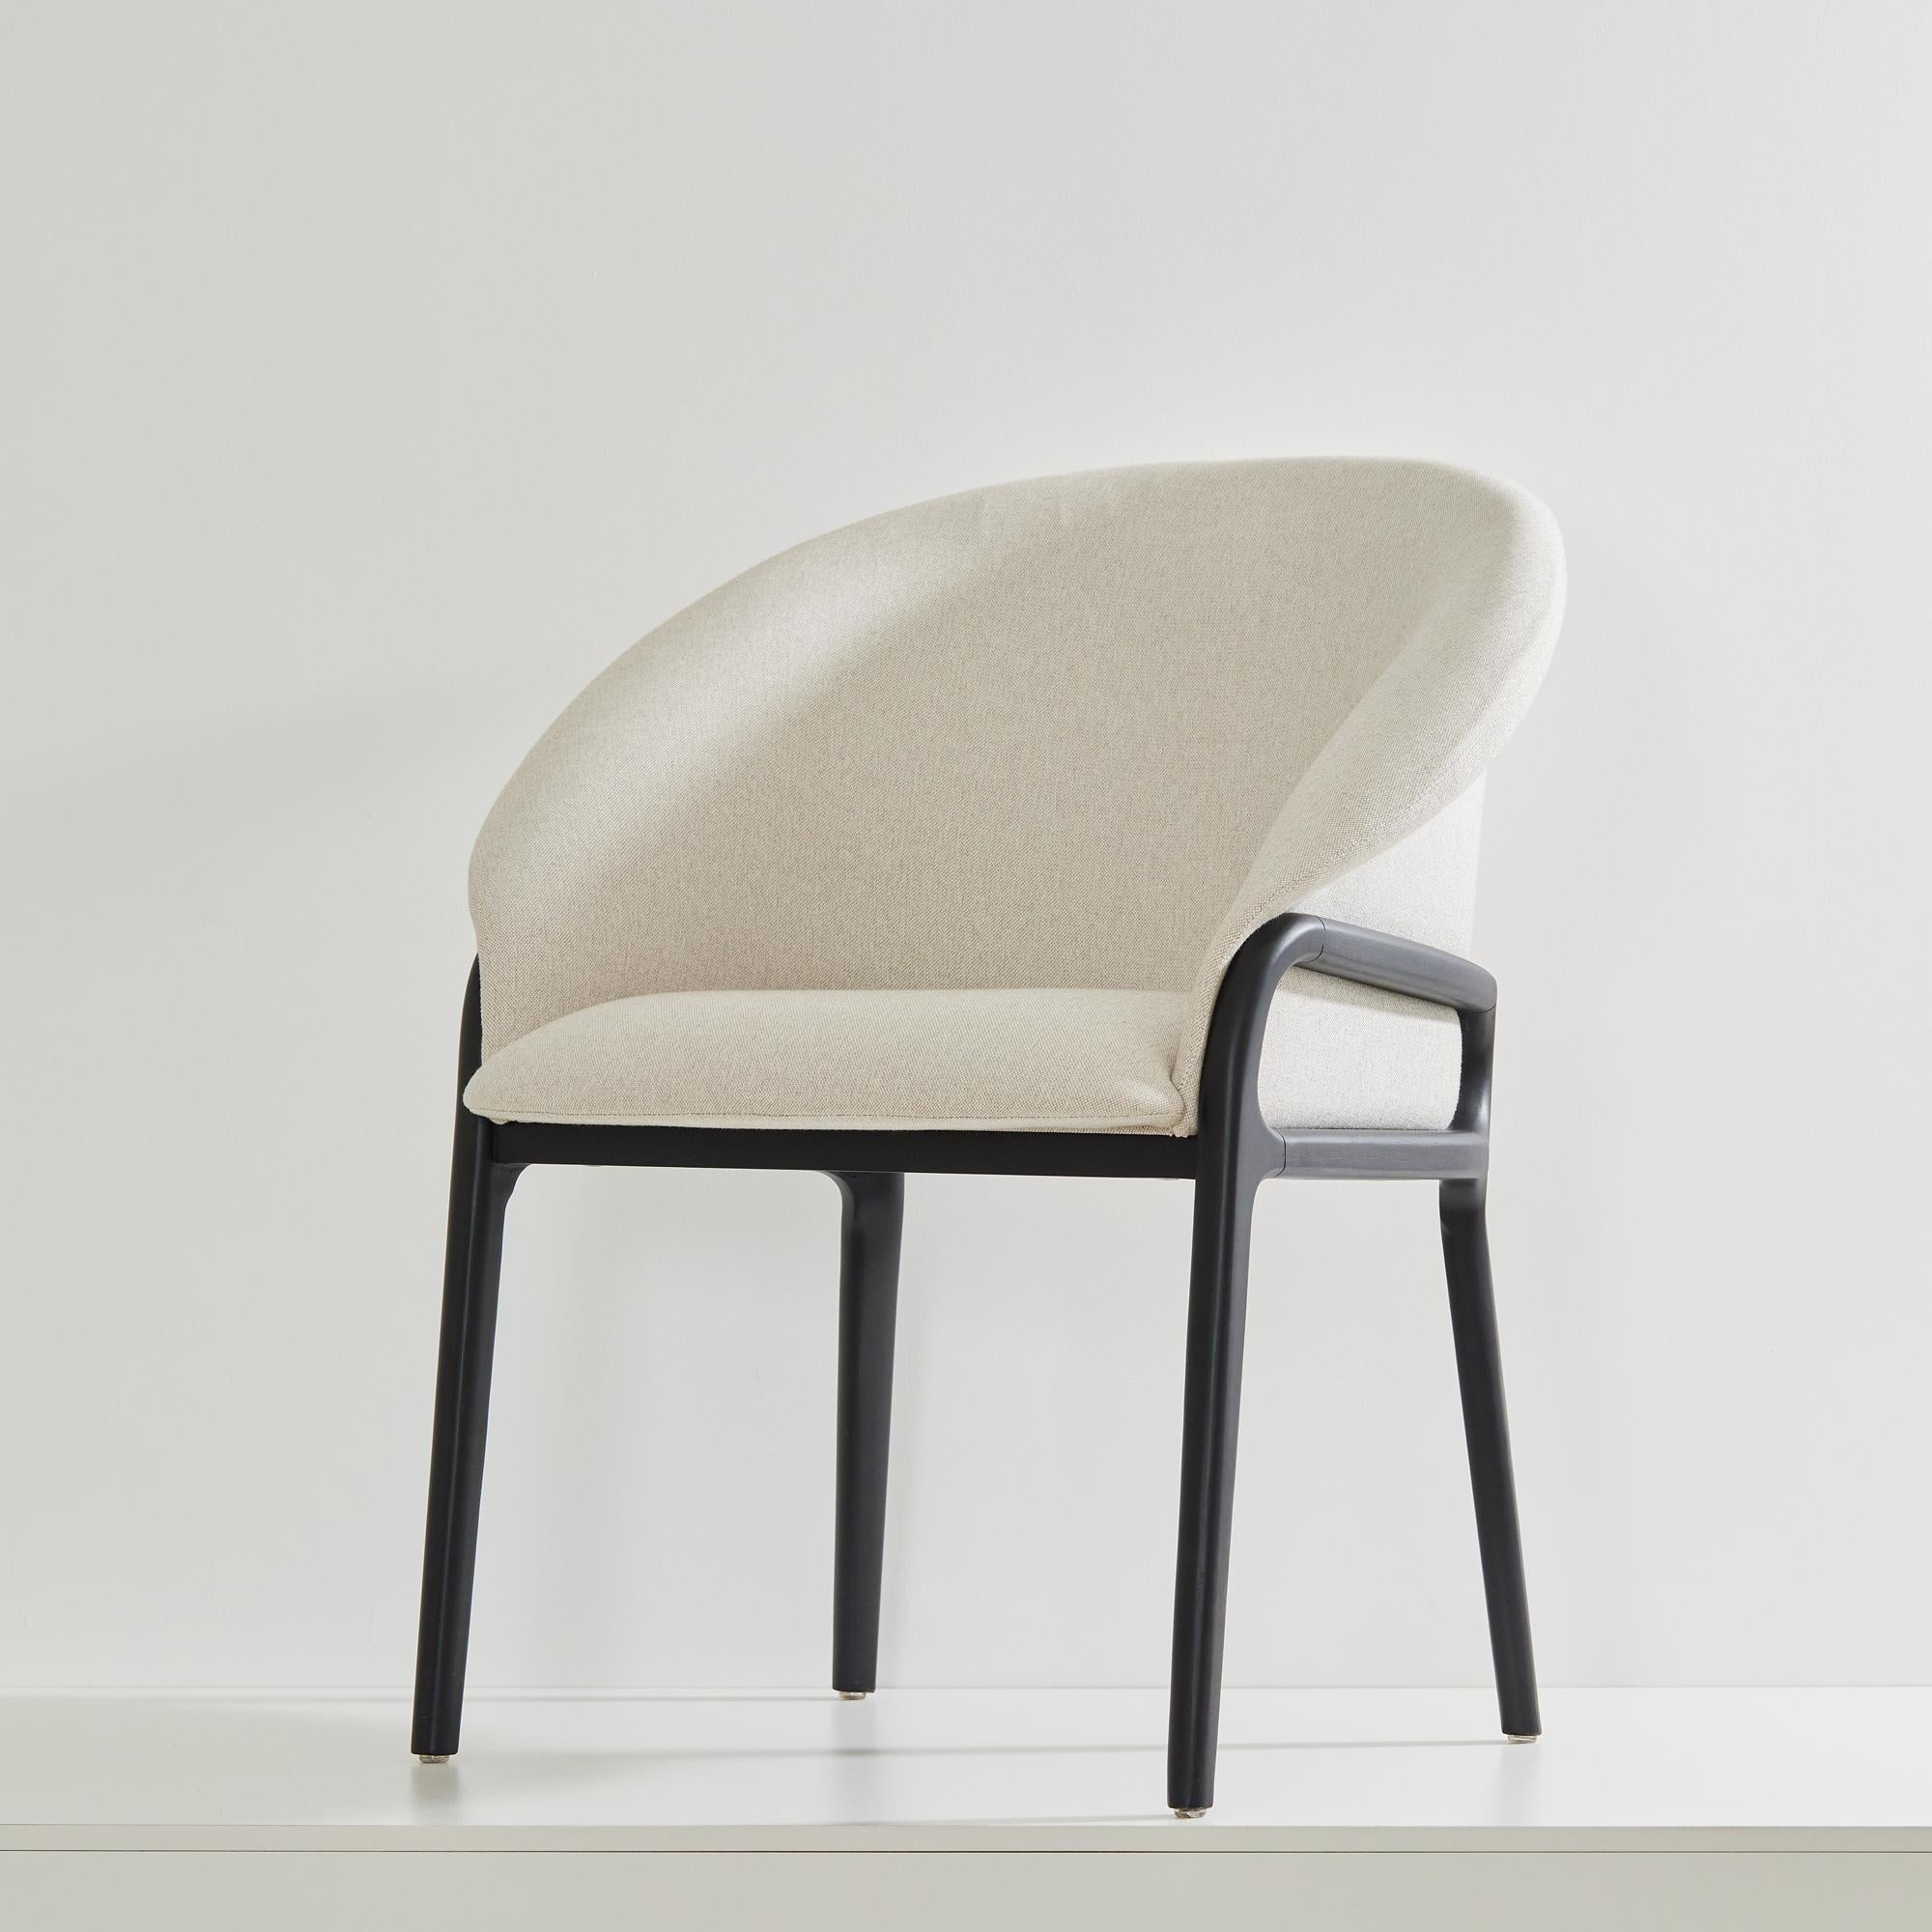 Contemporary Minimalist Organic Chair in black Solid Wood, cian textiles Seating For Sale